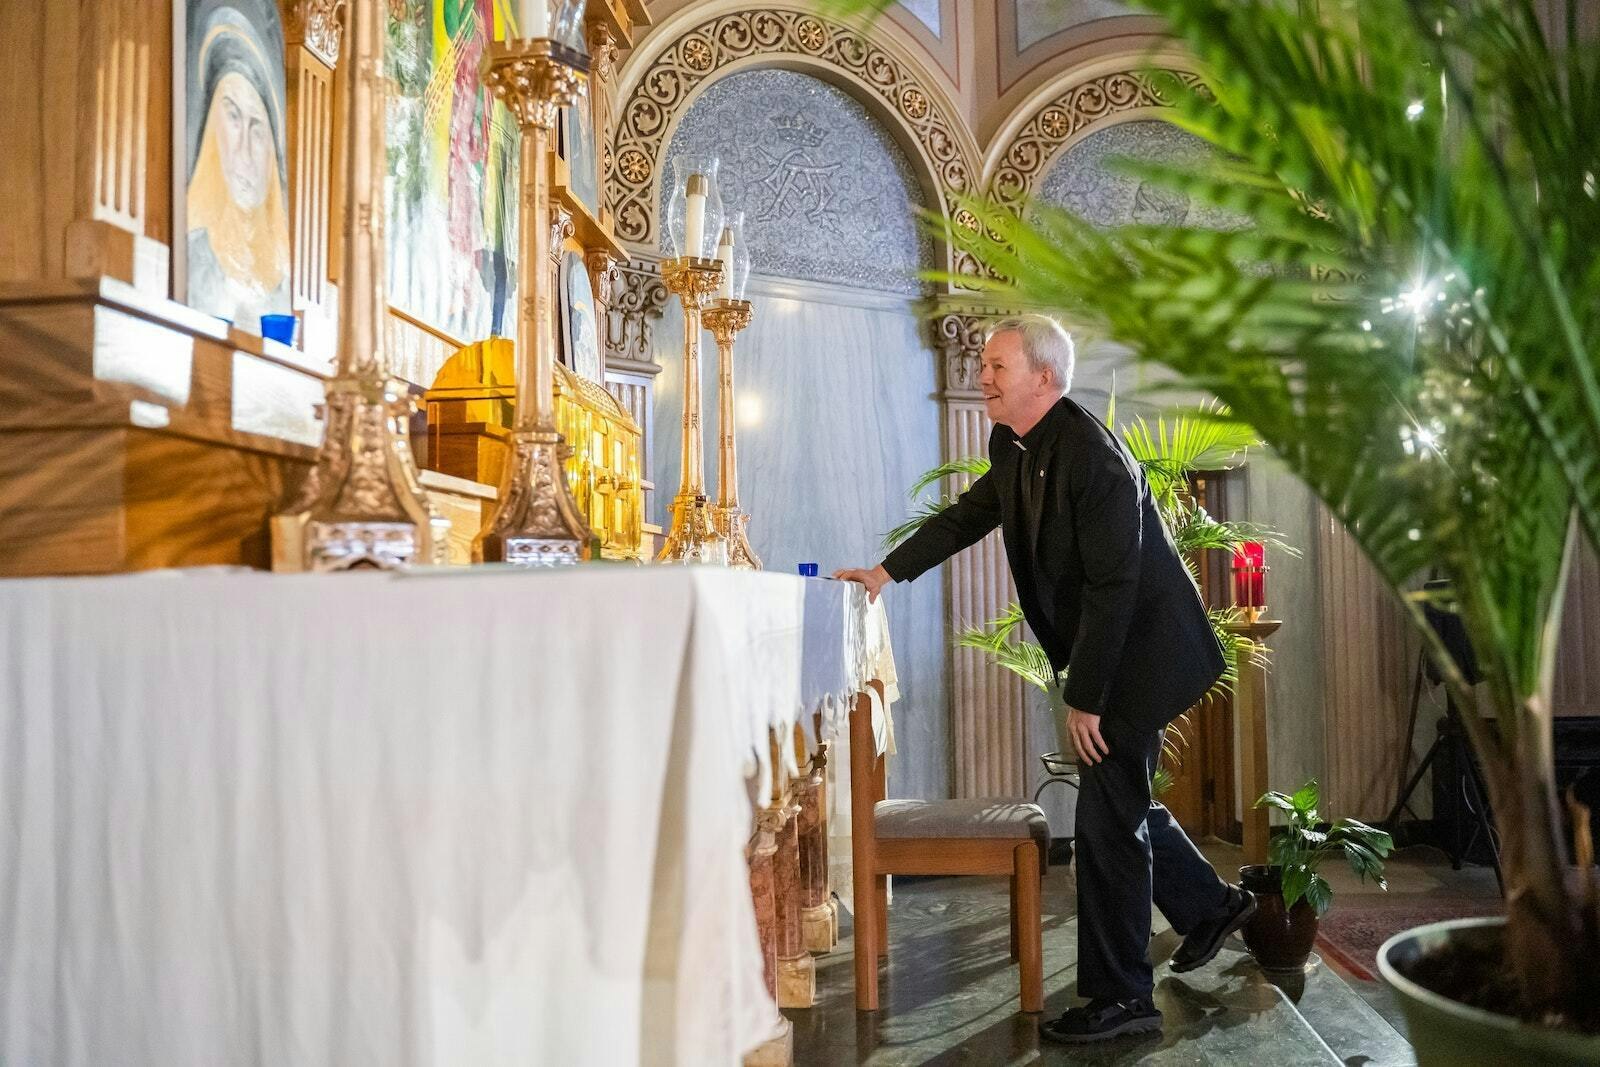 Msgr. Trapp kneels before the tabernacle at St. Augustine and St. Monica Parish in Detroit, where he served from 1995 until his death. Msgr. Trapp loved Catholic architecture and art, and was well-versed in Carmelite and Ignatian spirituality, Fr. Fox said. (Valaurian Waller | Detroit Catholic)